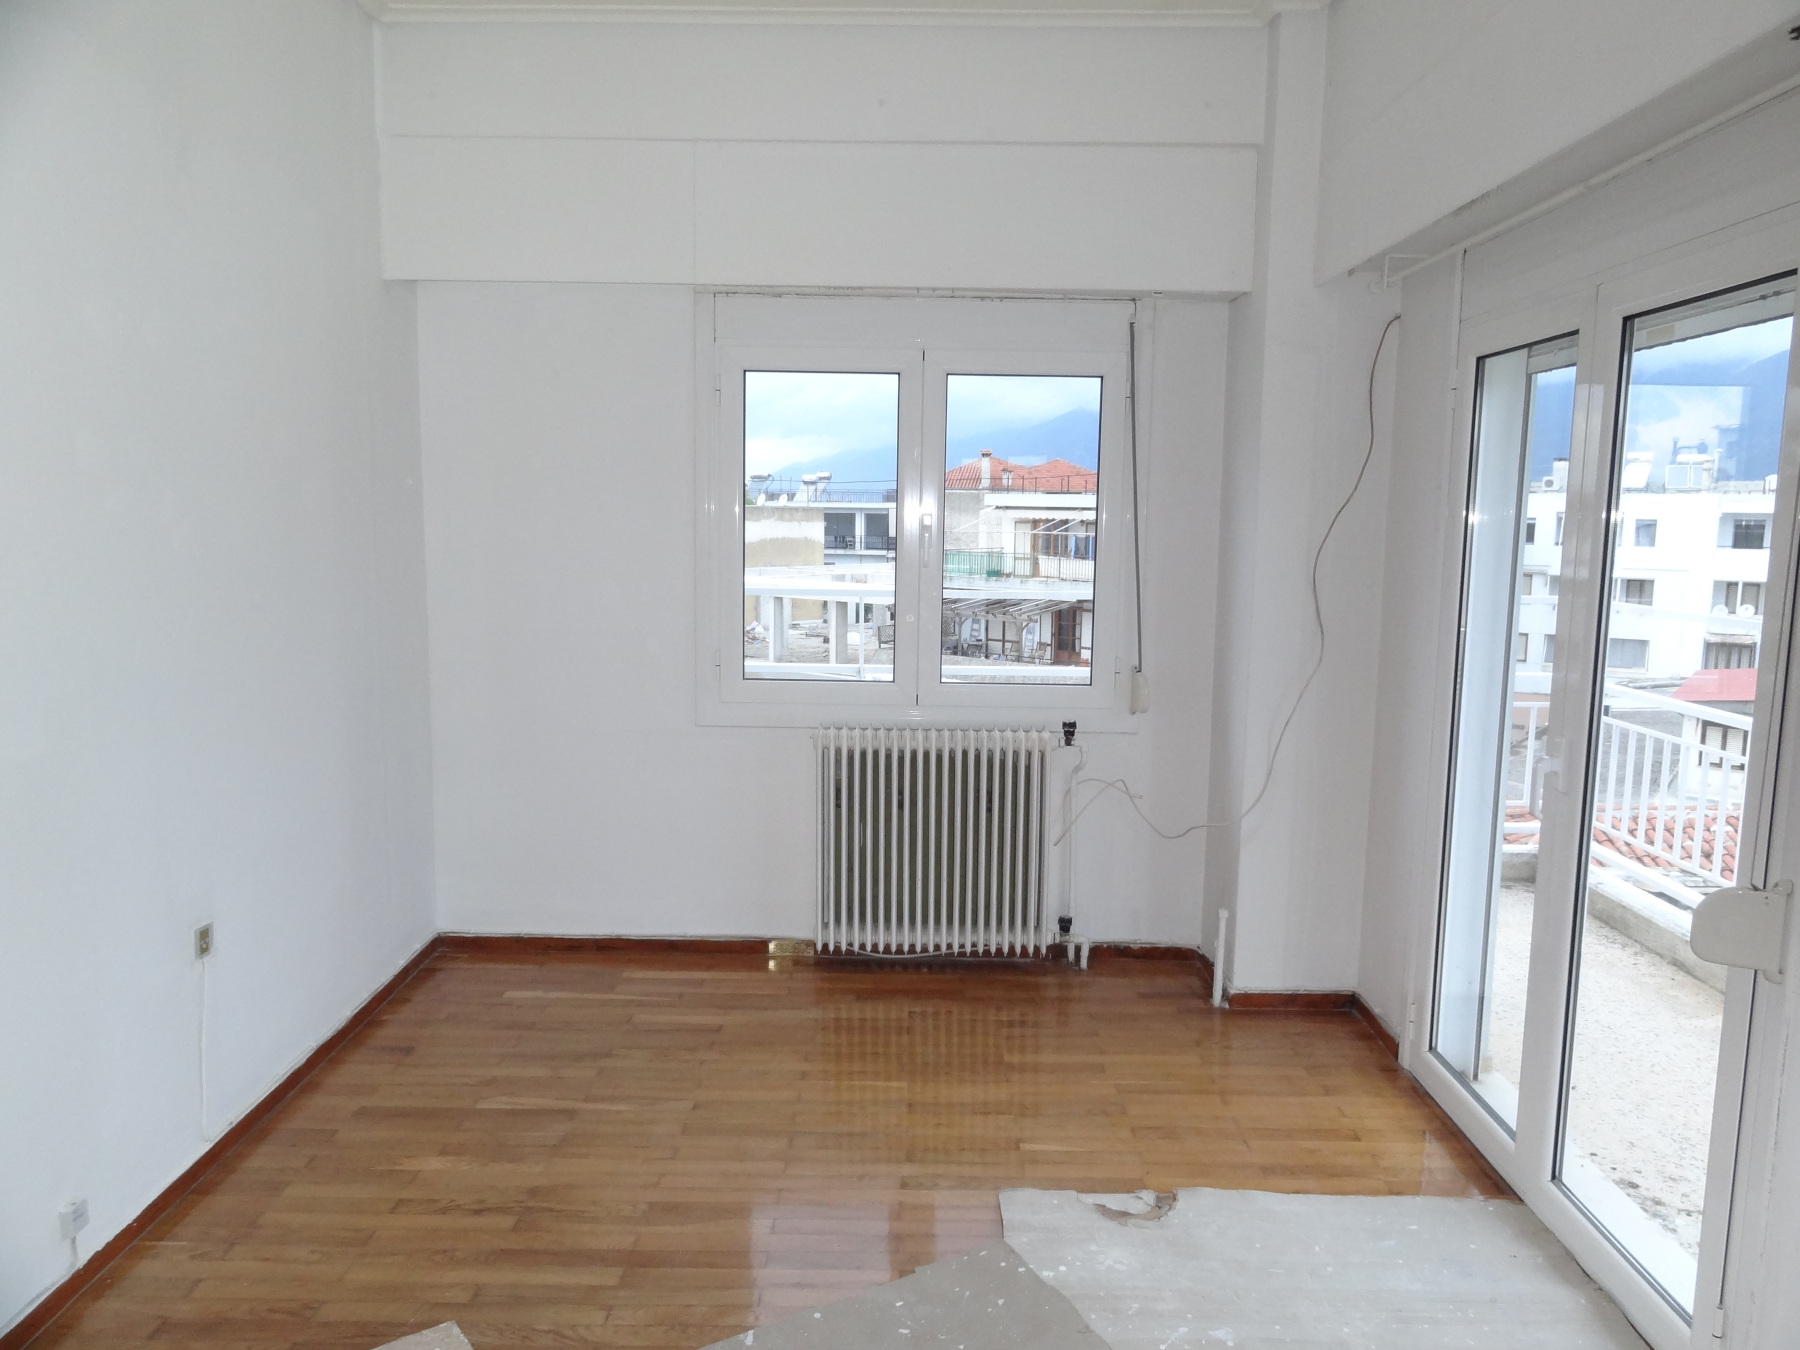 For rent, a comfortable 1 bedroom apartment of 60 sq.m. 3rd floor in the center of Ioannina near the library